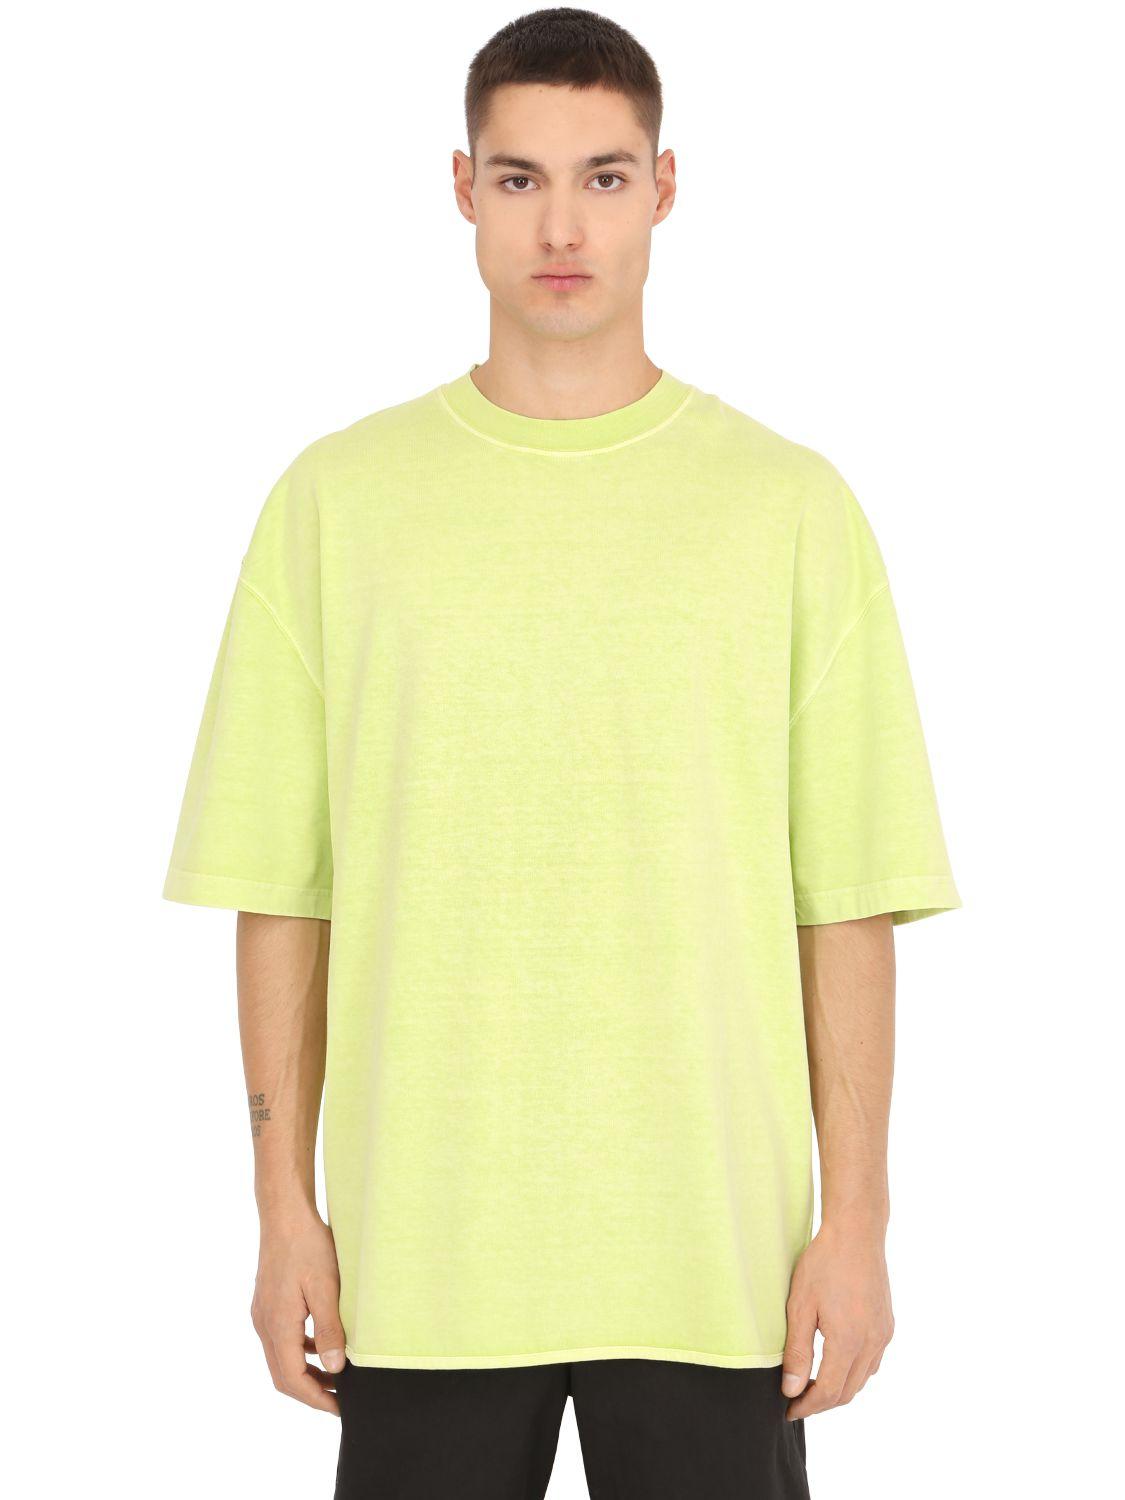 shirts for yeezys